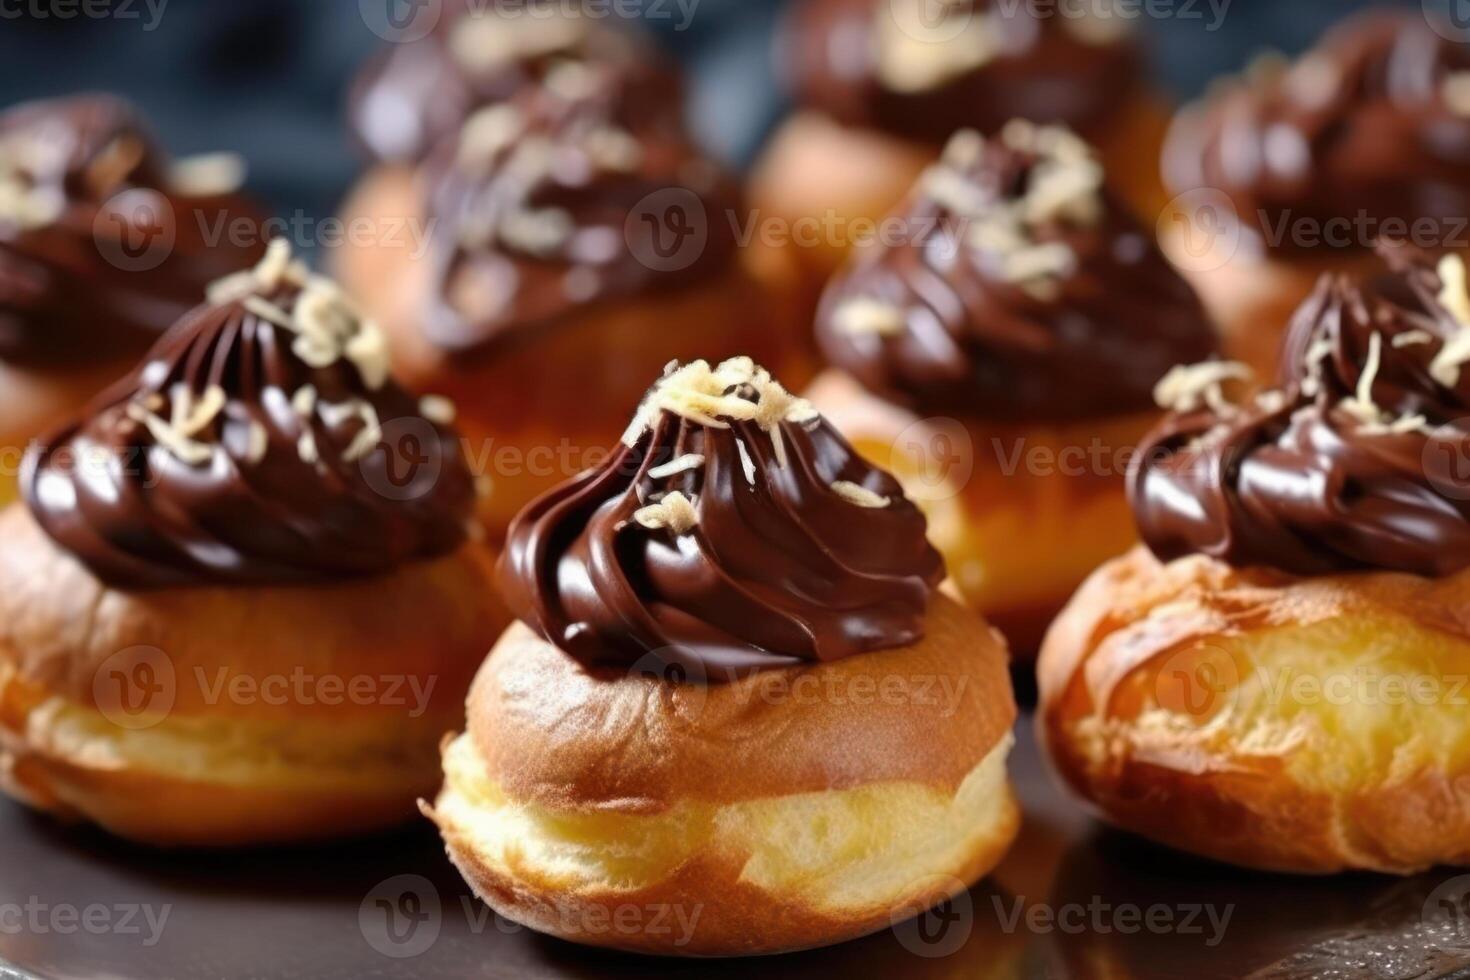 stock photo of Choux pastry with topping chocolate and slice almond food photography